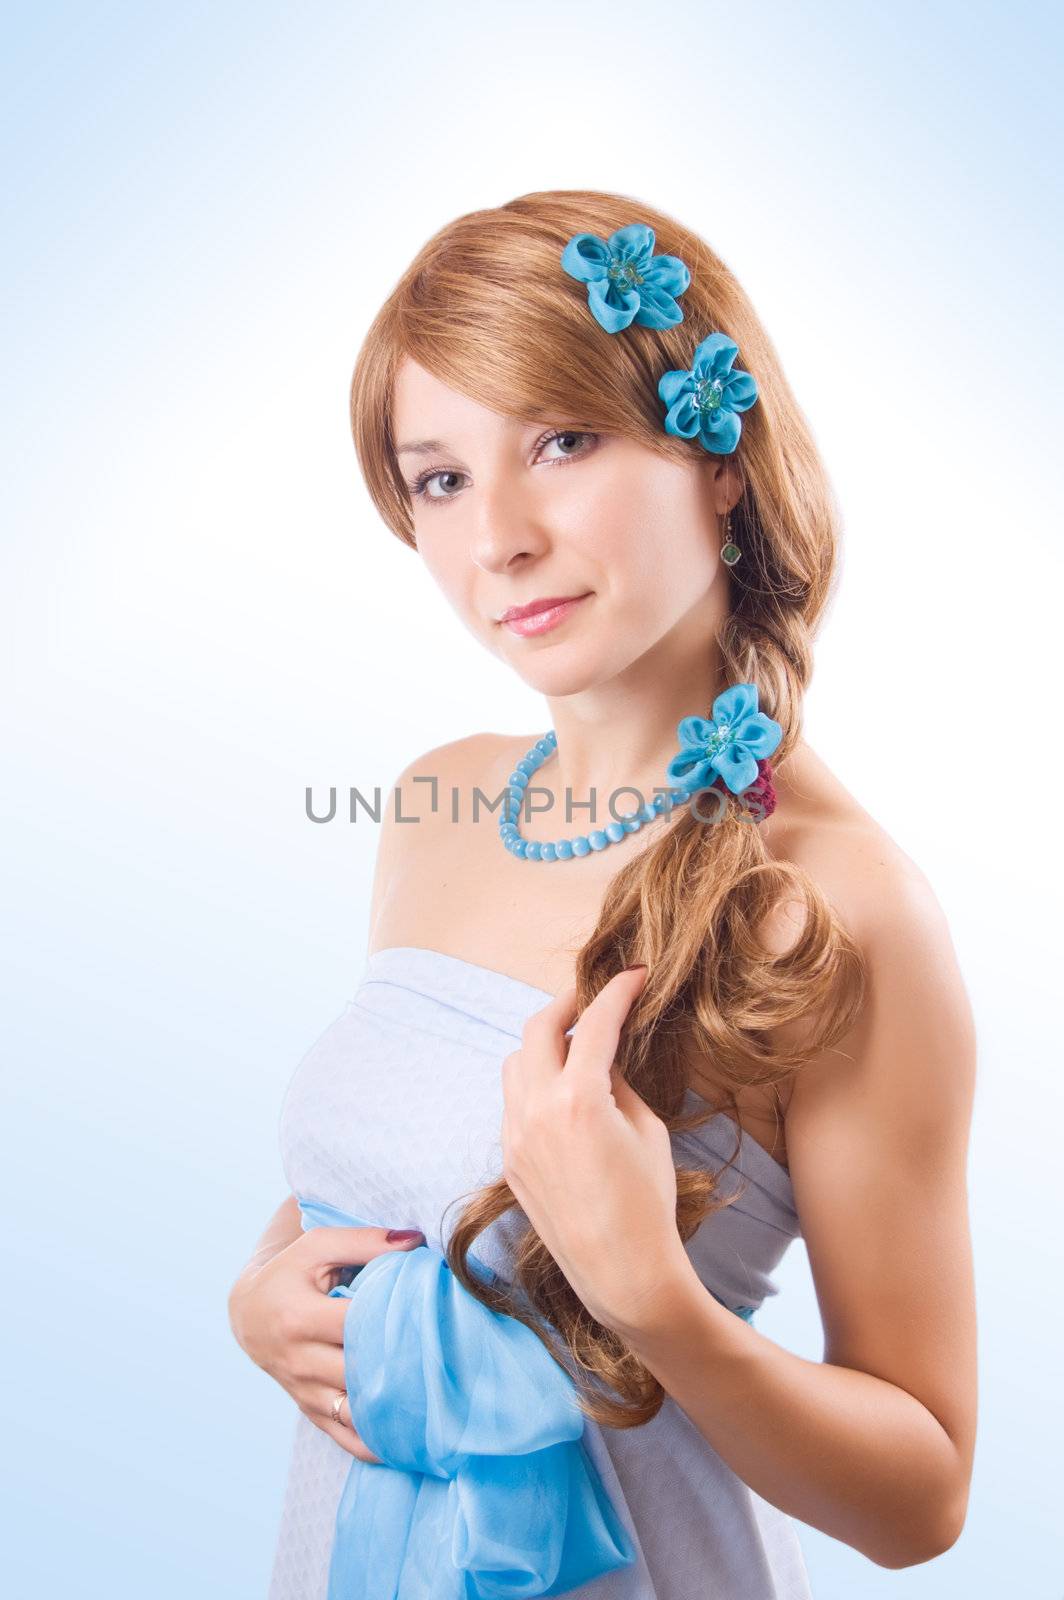 Woman in blue dress with flowers in hair over light blue back